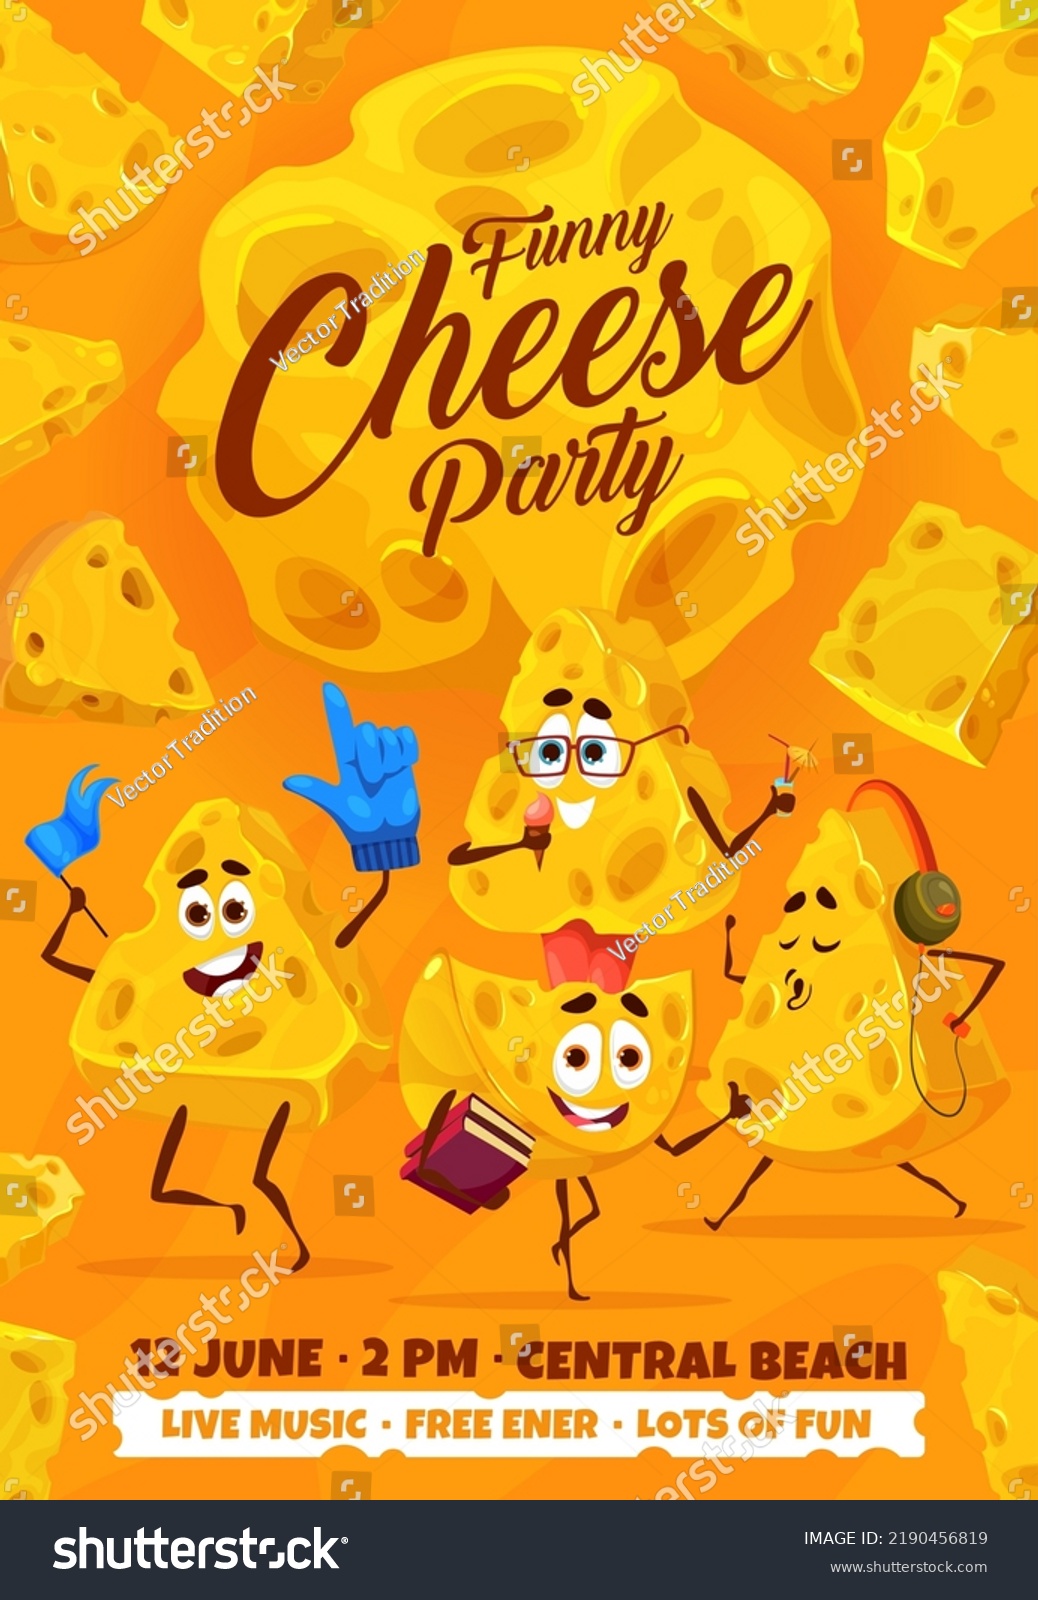 SVG of Cheese party flyer, cartoon maasdam and gouda cheese characters. Vector invitation poster with funny dairy food personages with books, microphone, headset and fan glove. Live music party svg